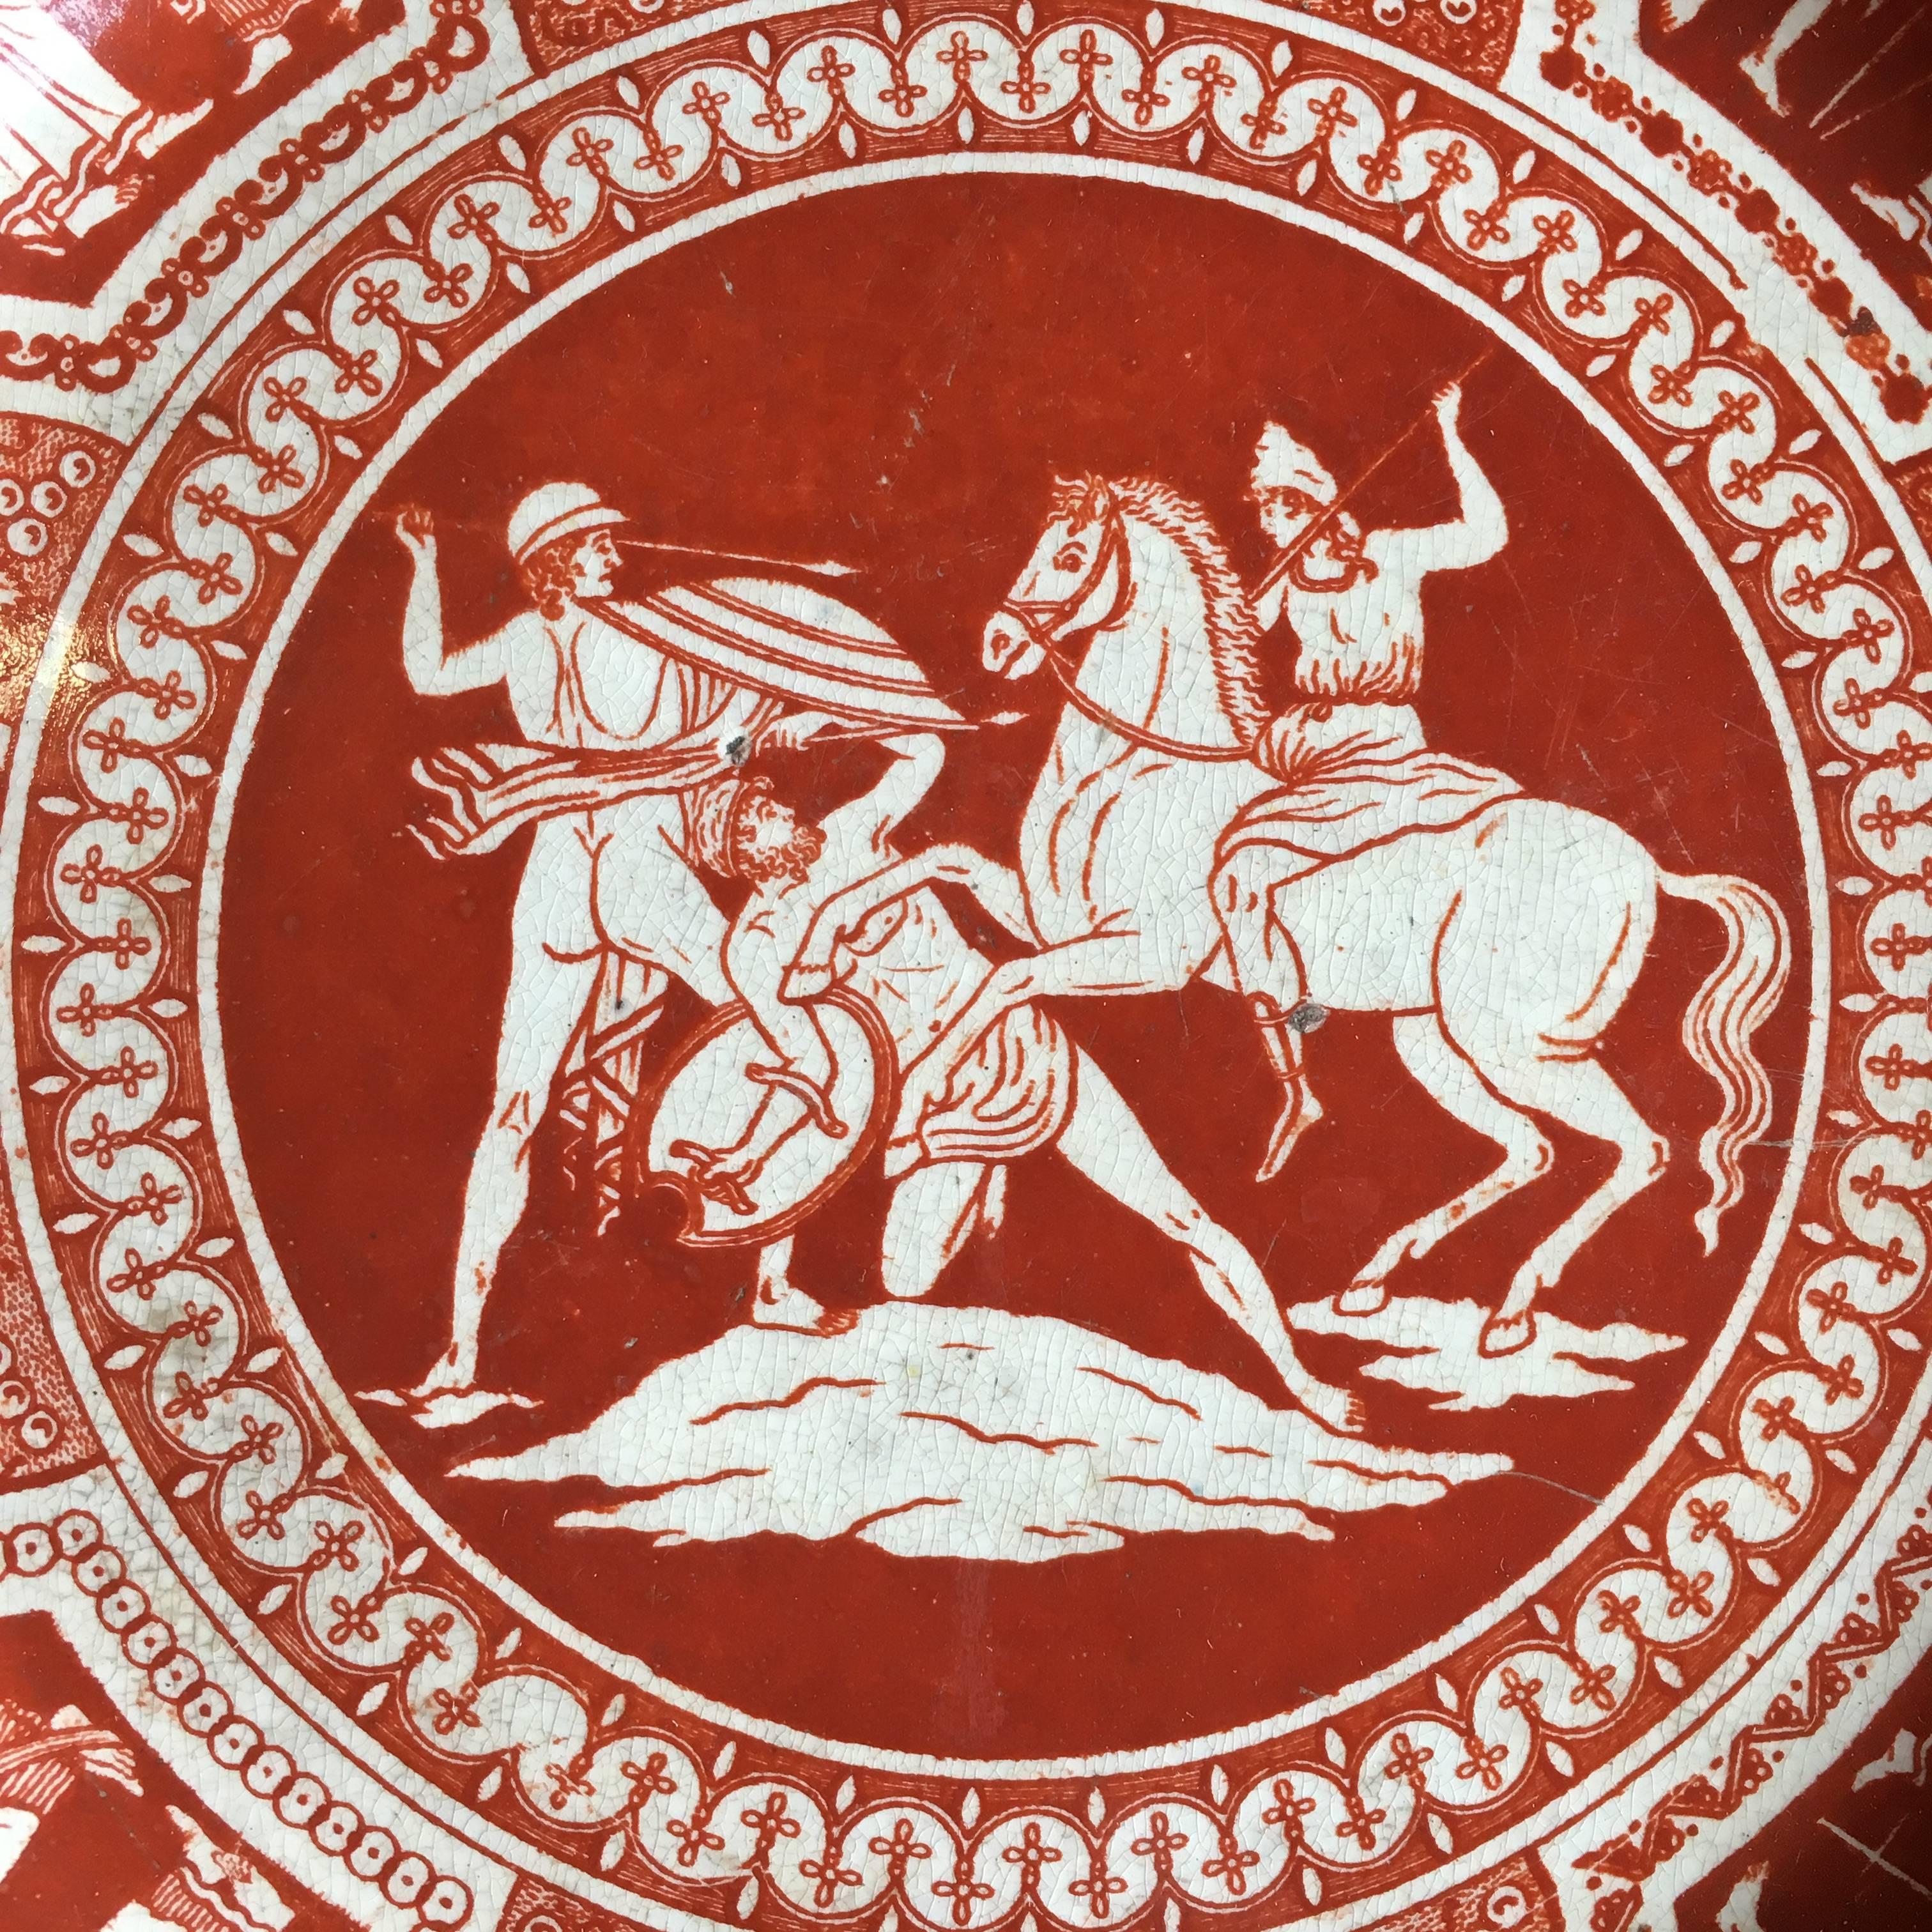 An interesting early 19th century plate decorated in coral red glaze depicting a Greek battle scene and other motifs, circa 1800, French.